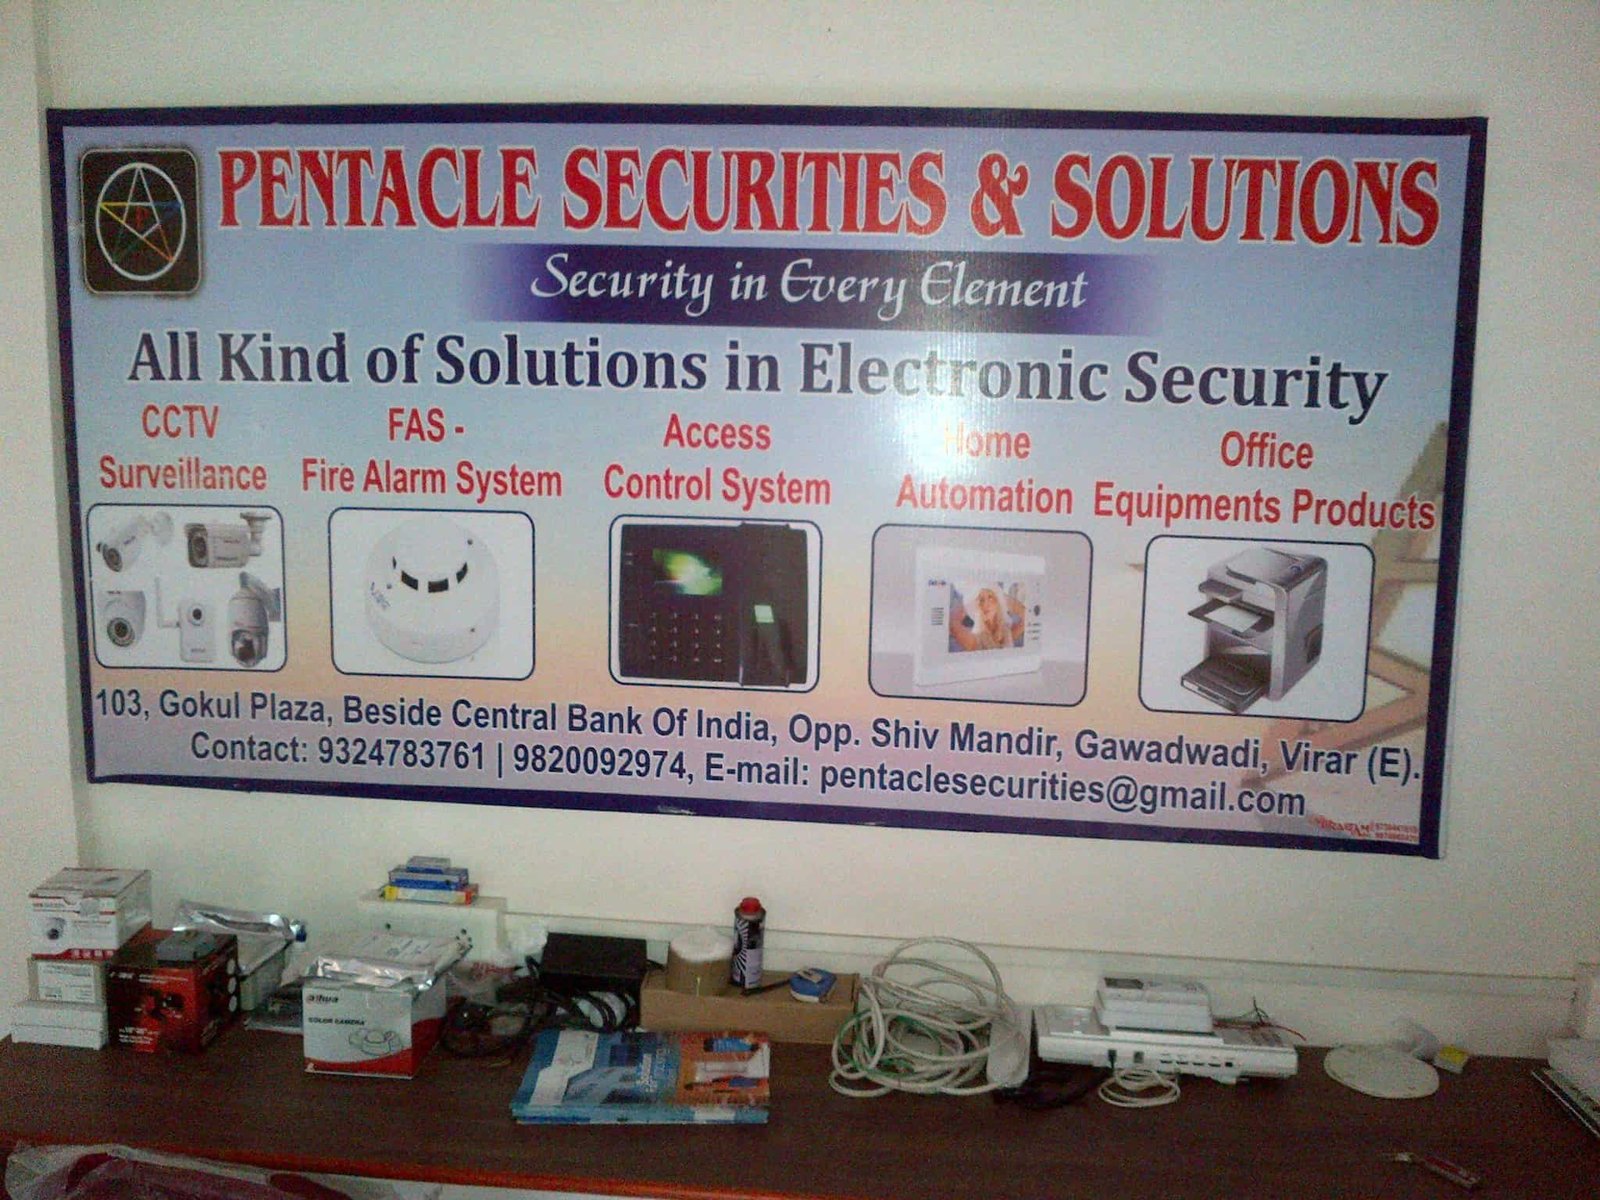 Pentacle Securitiles & Solutions